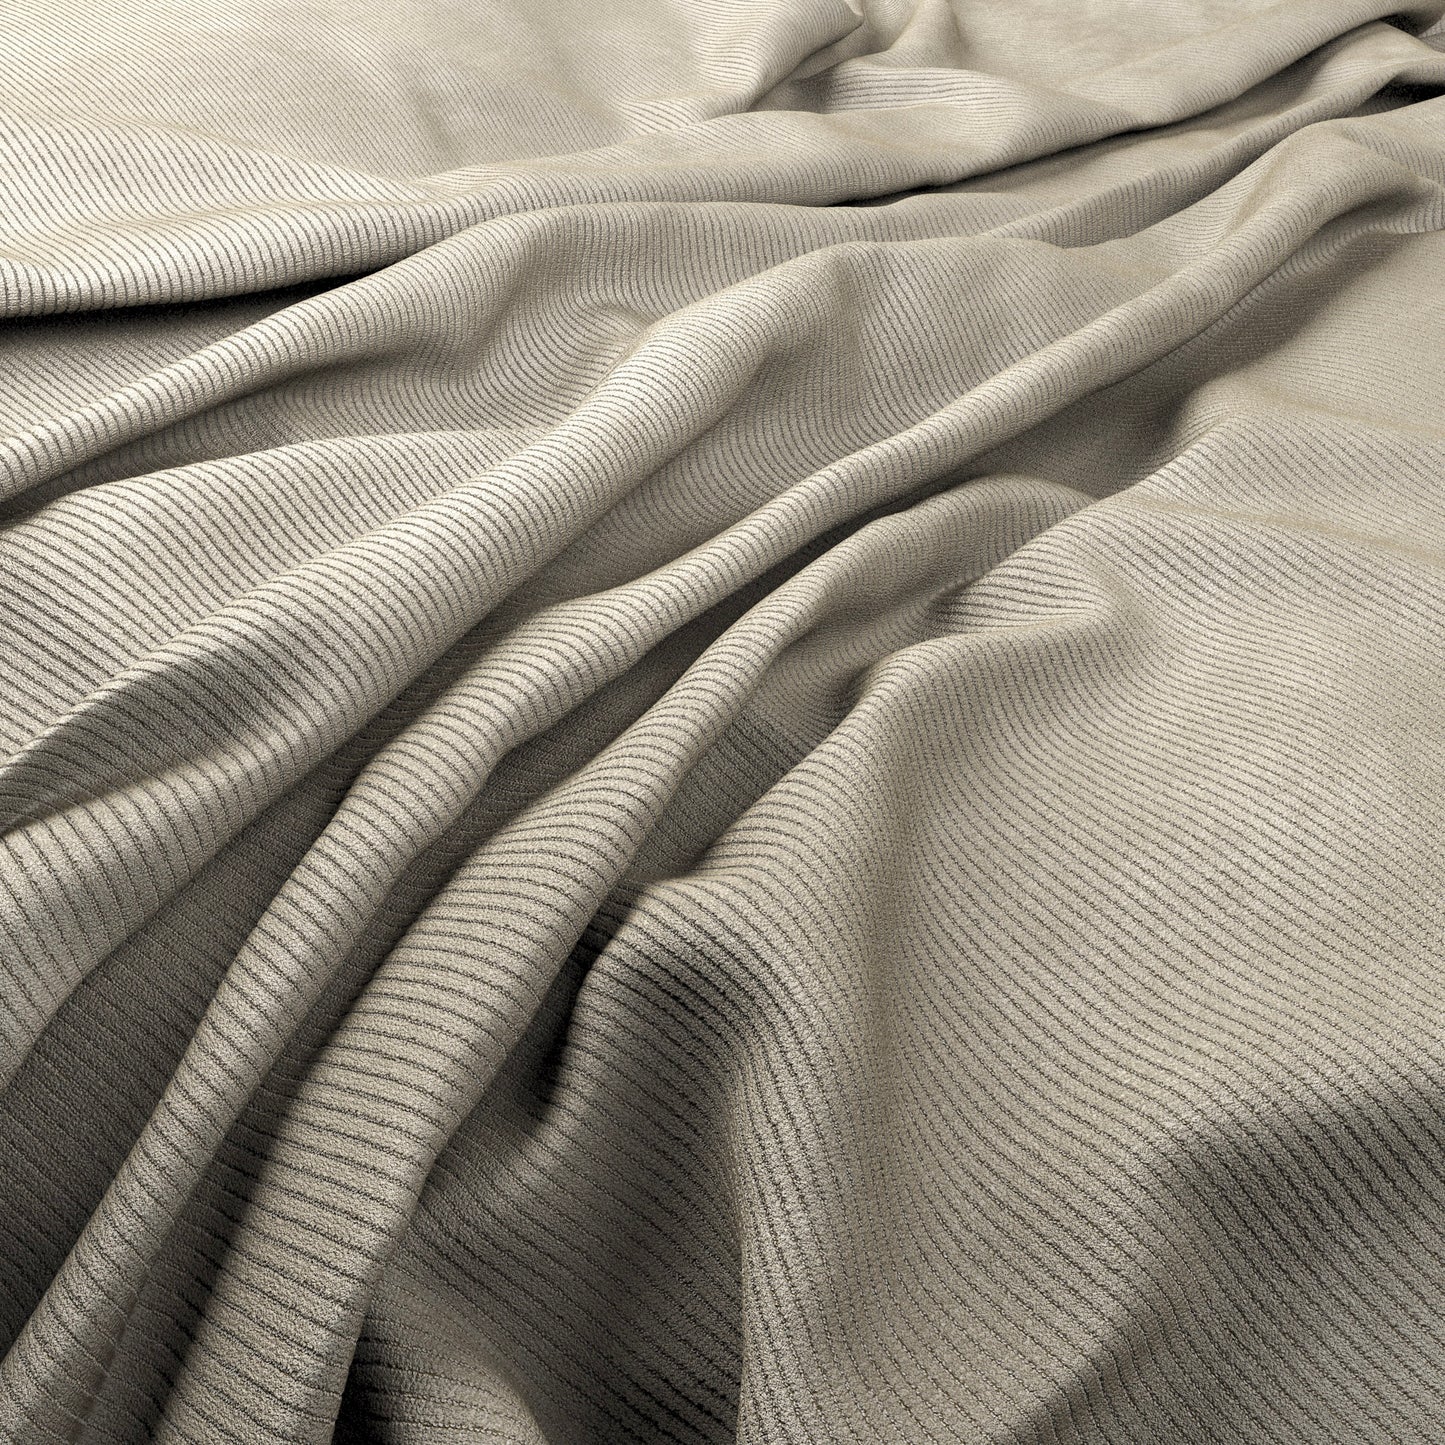 Canas Fabric - Sauvage Collection